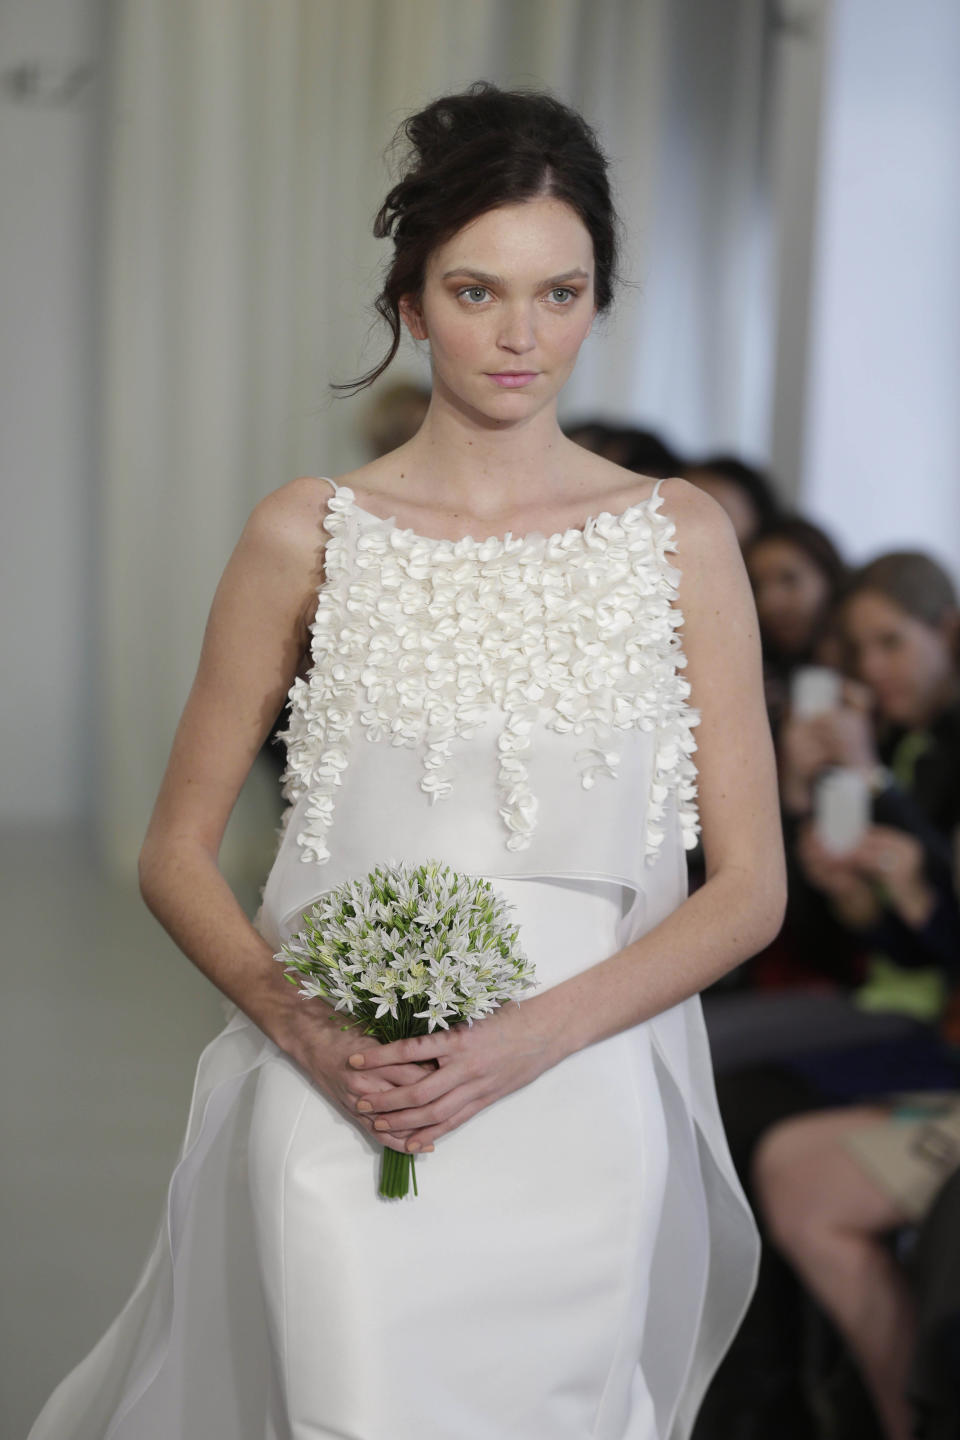 A bridal collection by Angel Sanchez is modeled in New York, Monday, April 22, 2013. (AP Photo/Seth Wenig)